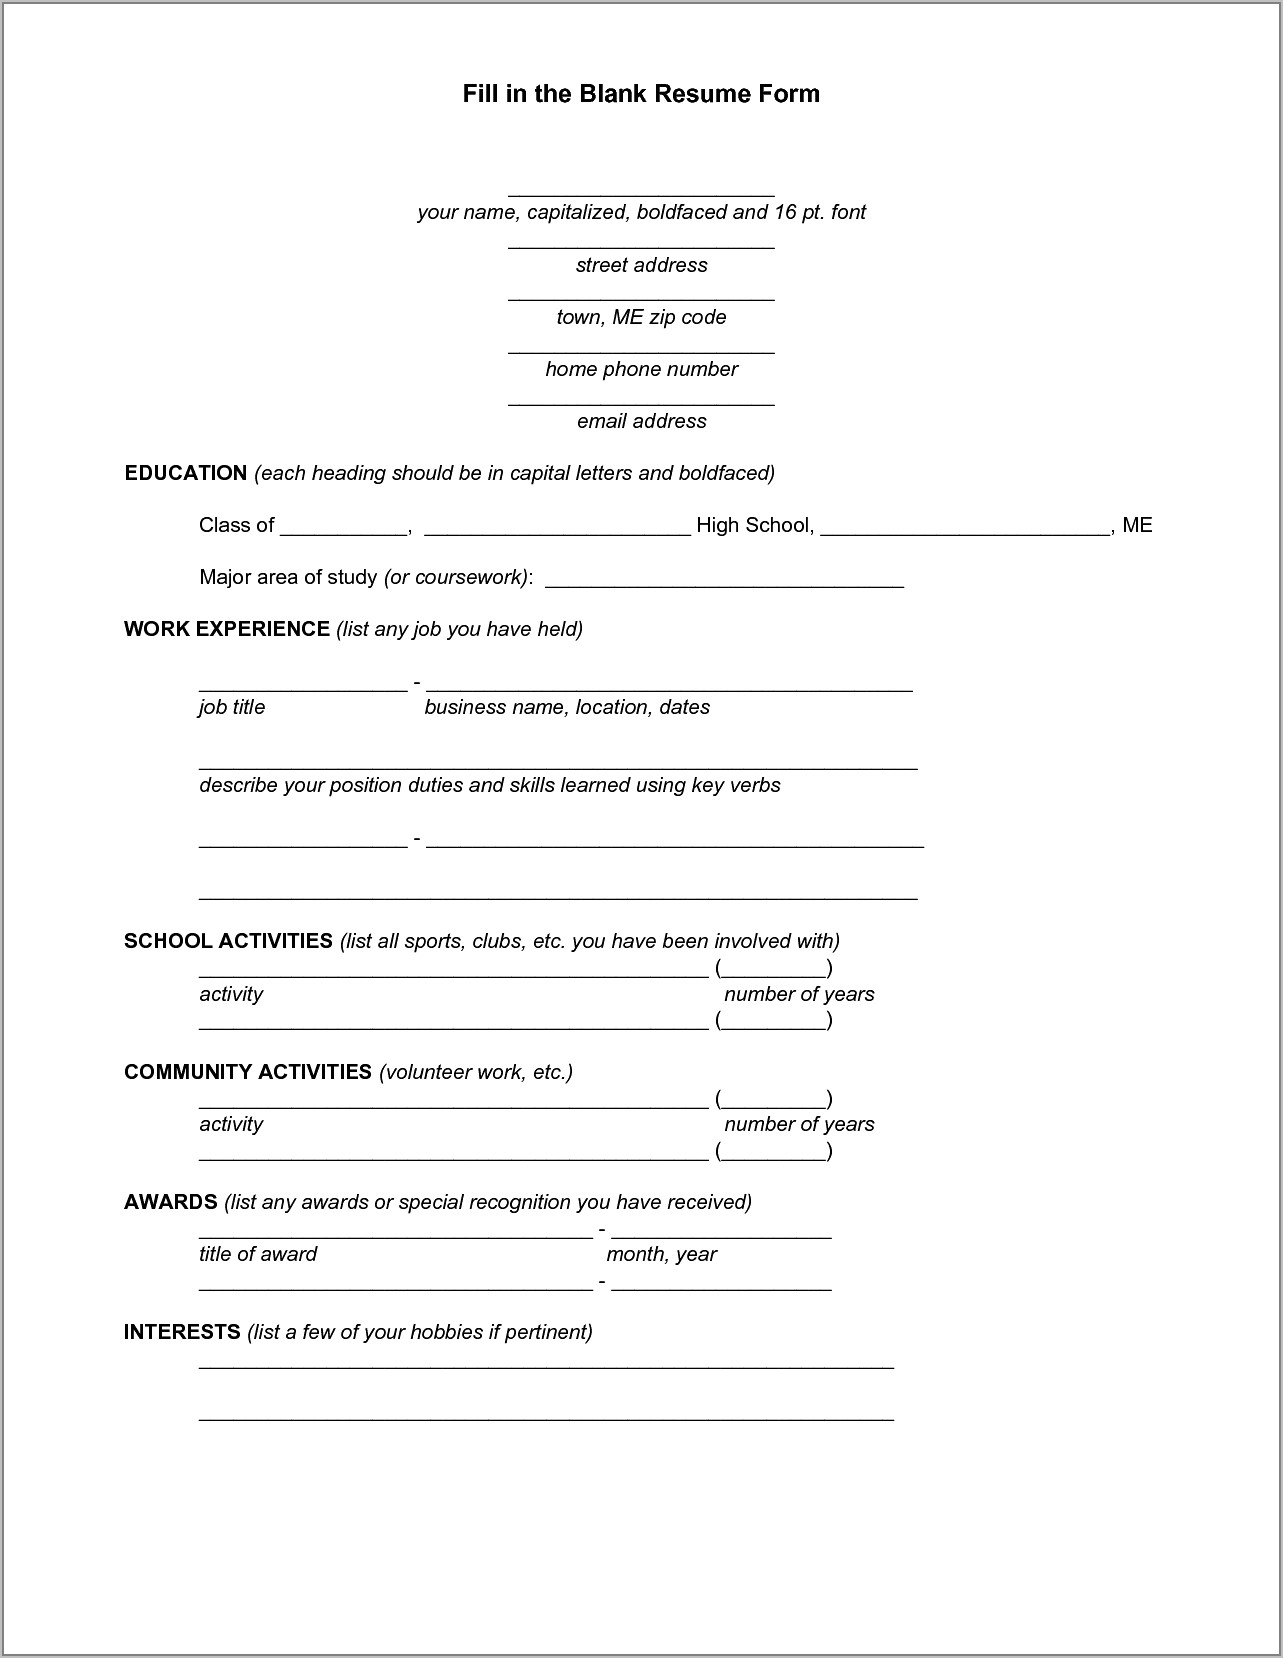 Fill In The Blank Resume Templates